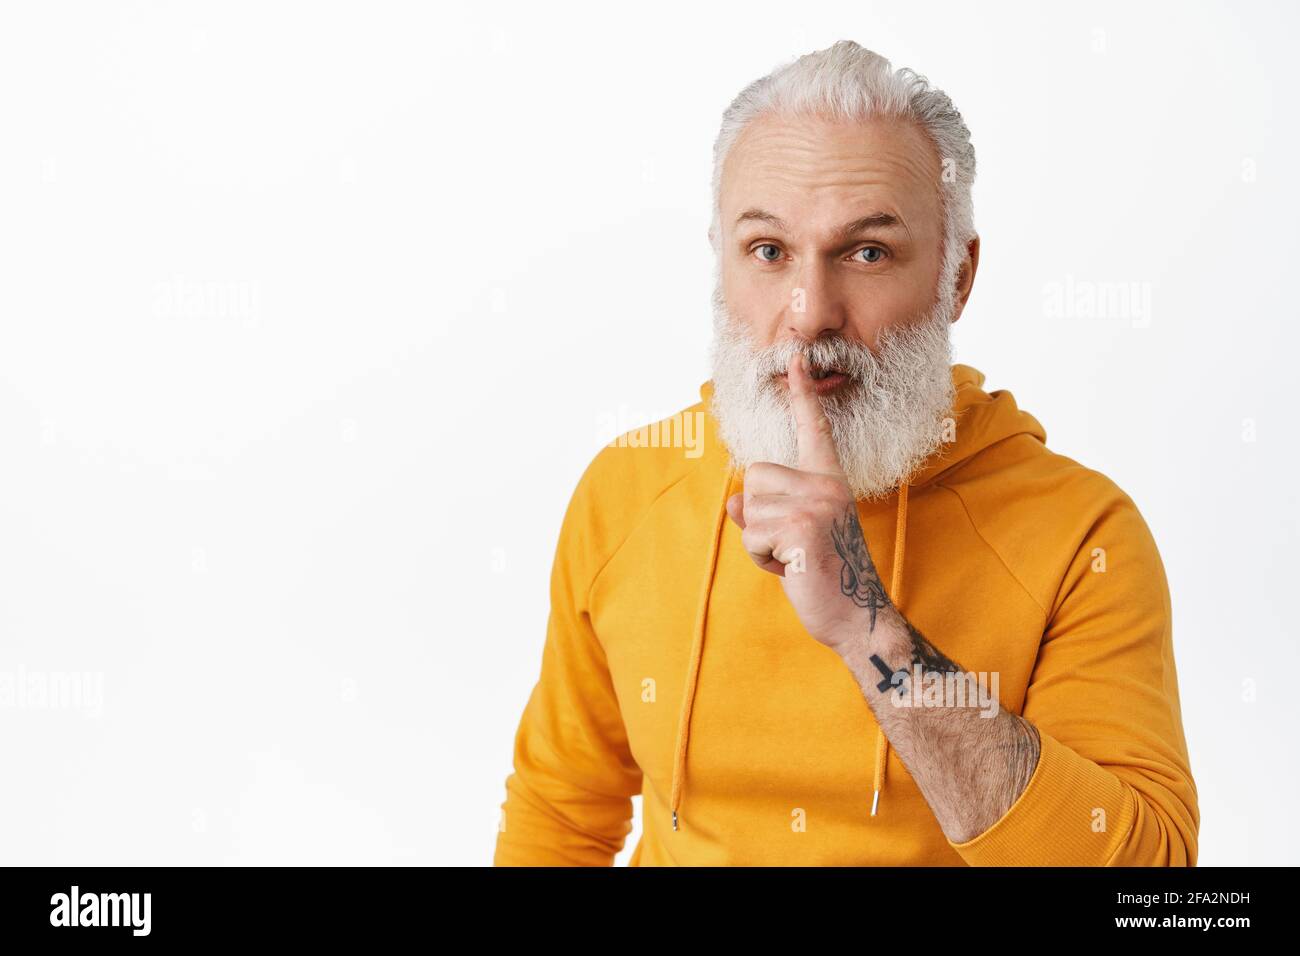 Shhhhhh Stock Photo - Download Image Now - 20-29 Years, Adult, Adults Only  - iStock